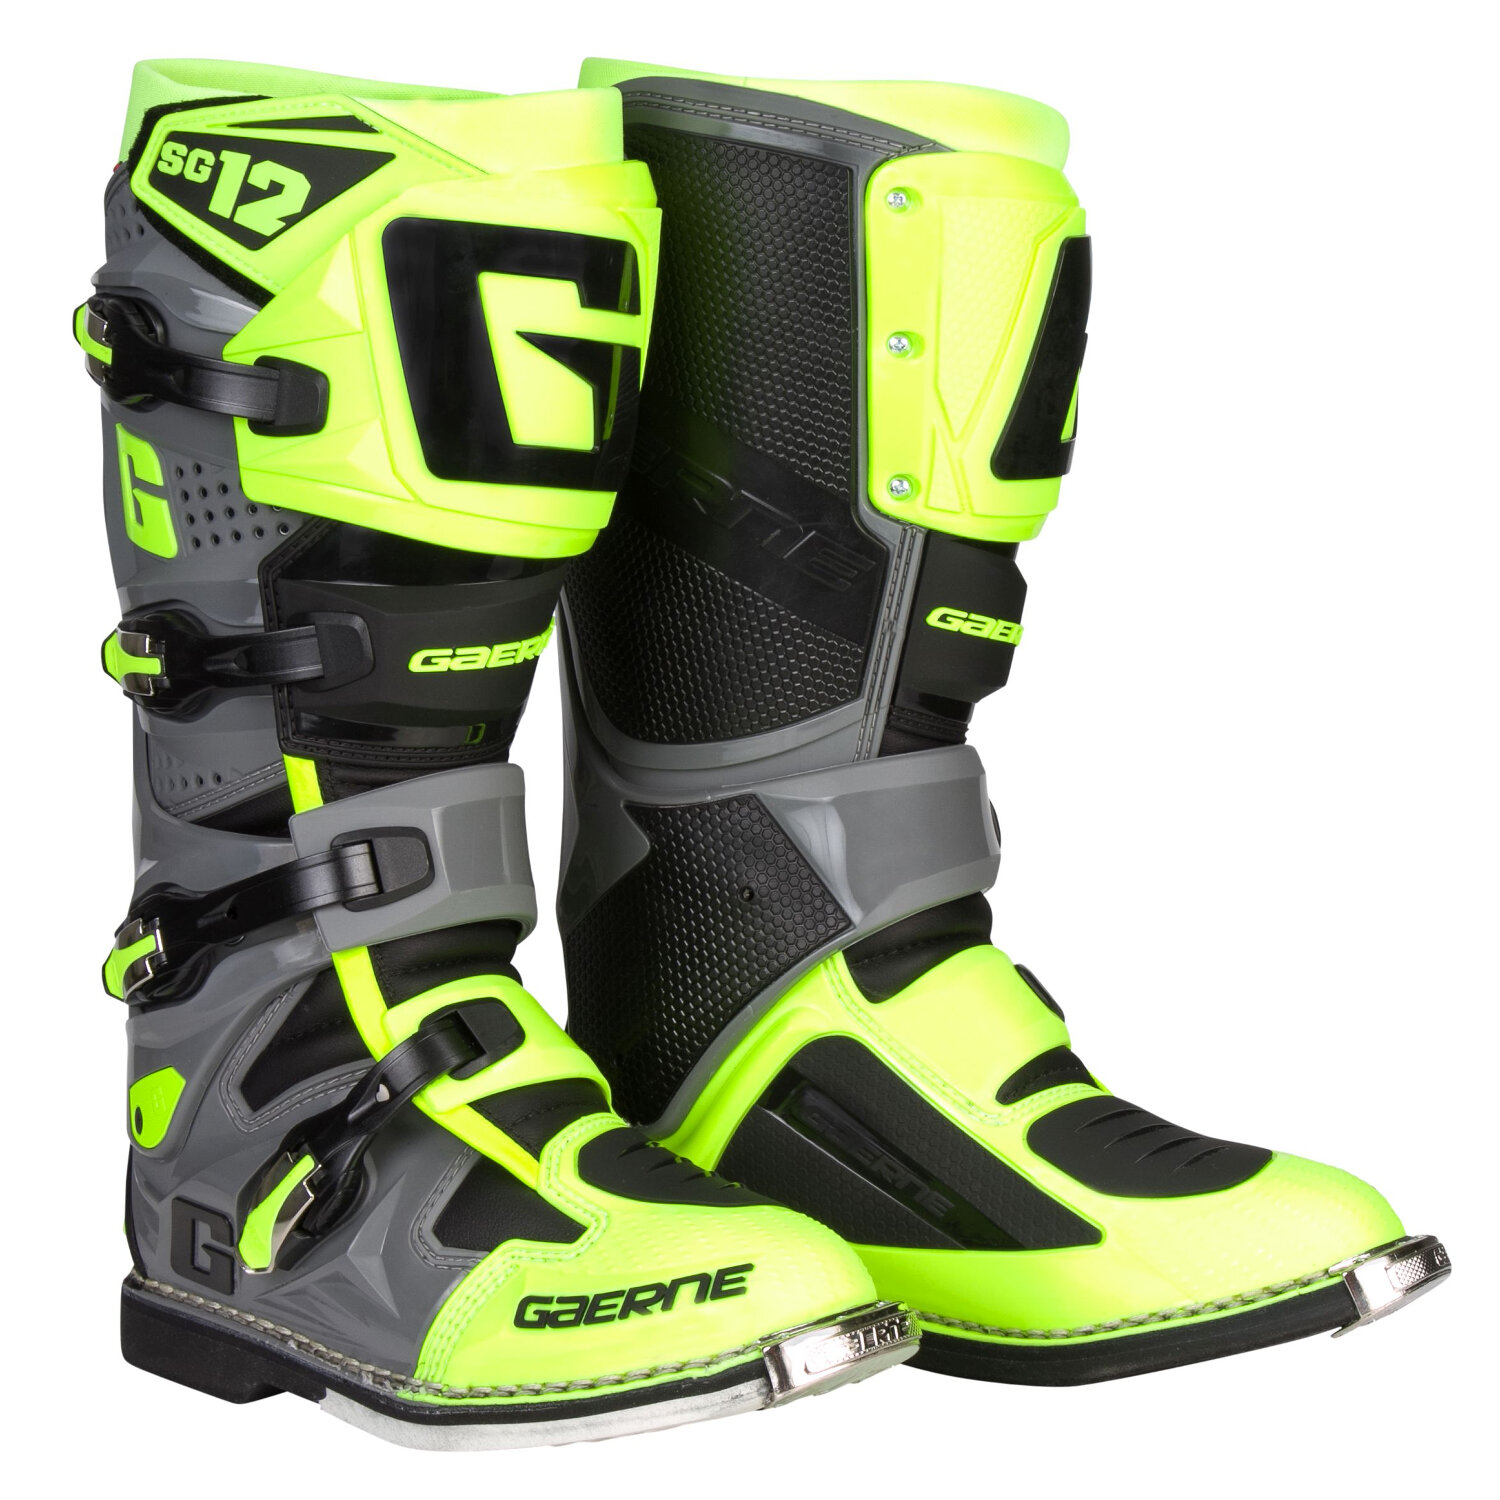 Gaerne MX Boots SG 12 Yellow